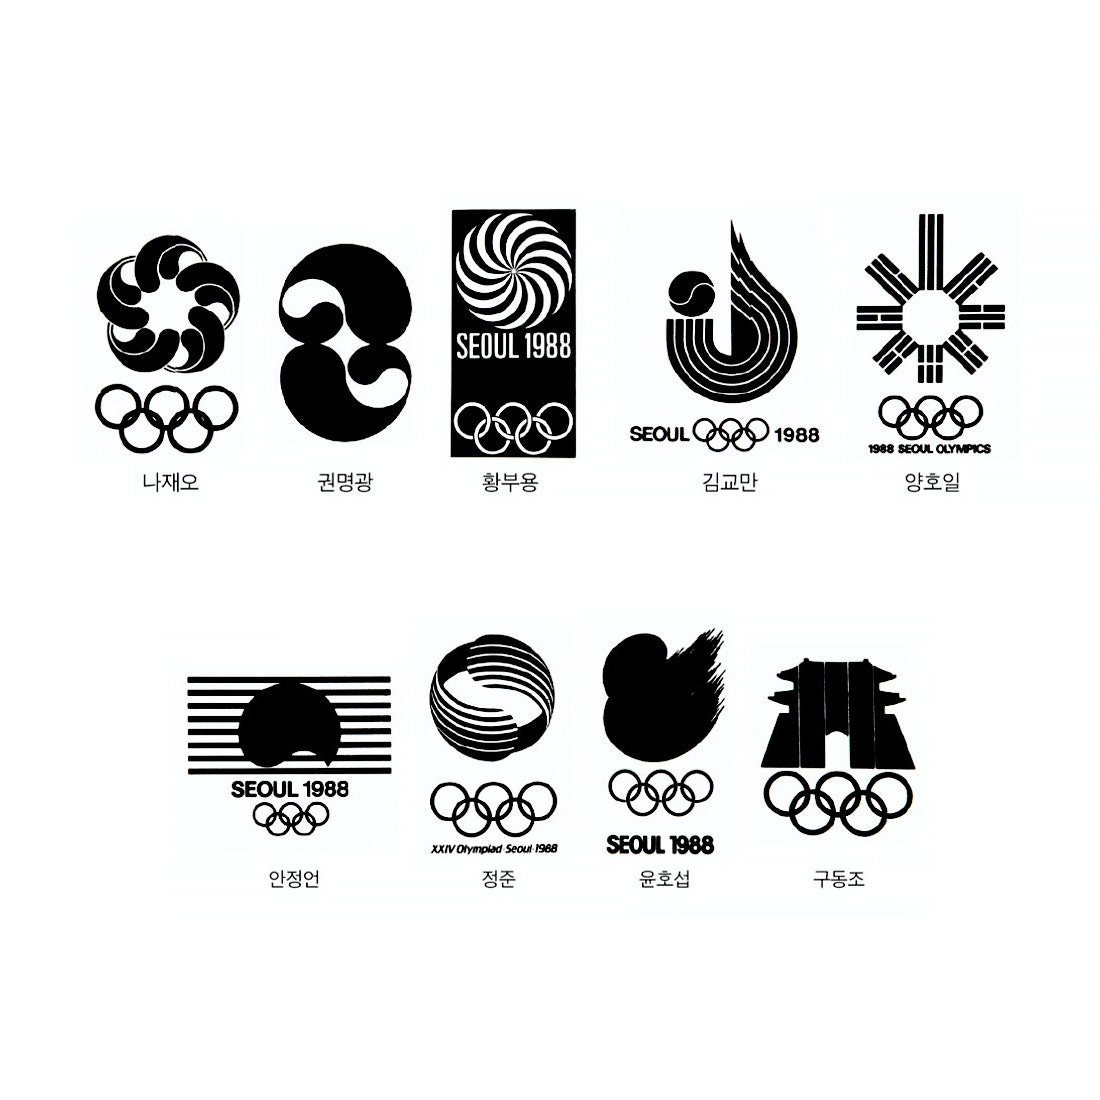 Logo proposals for the Seoul '88 Olympic Games